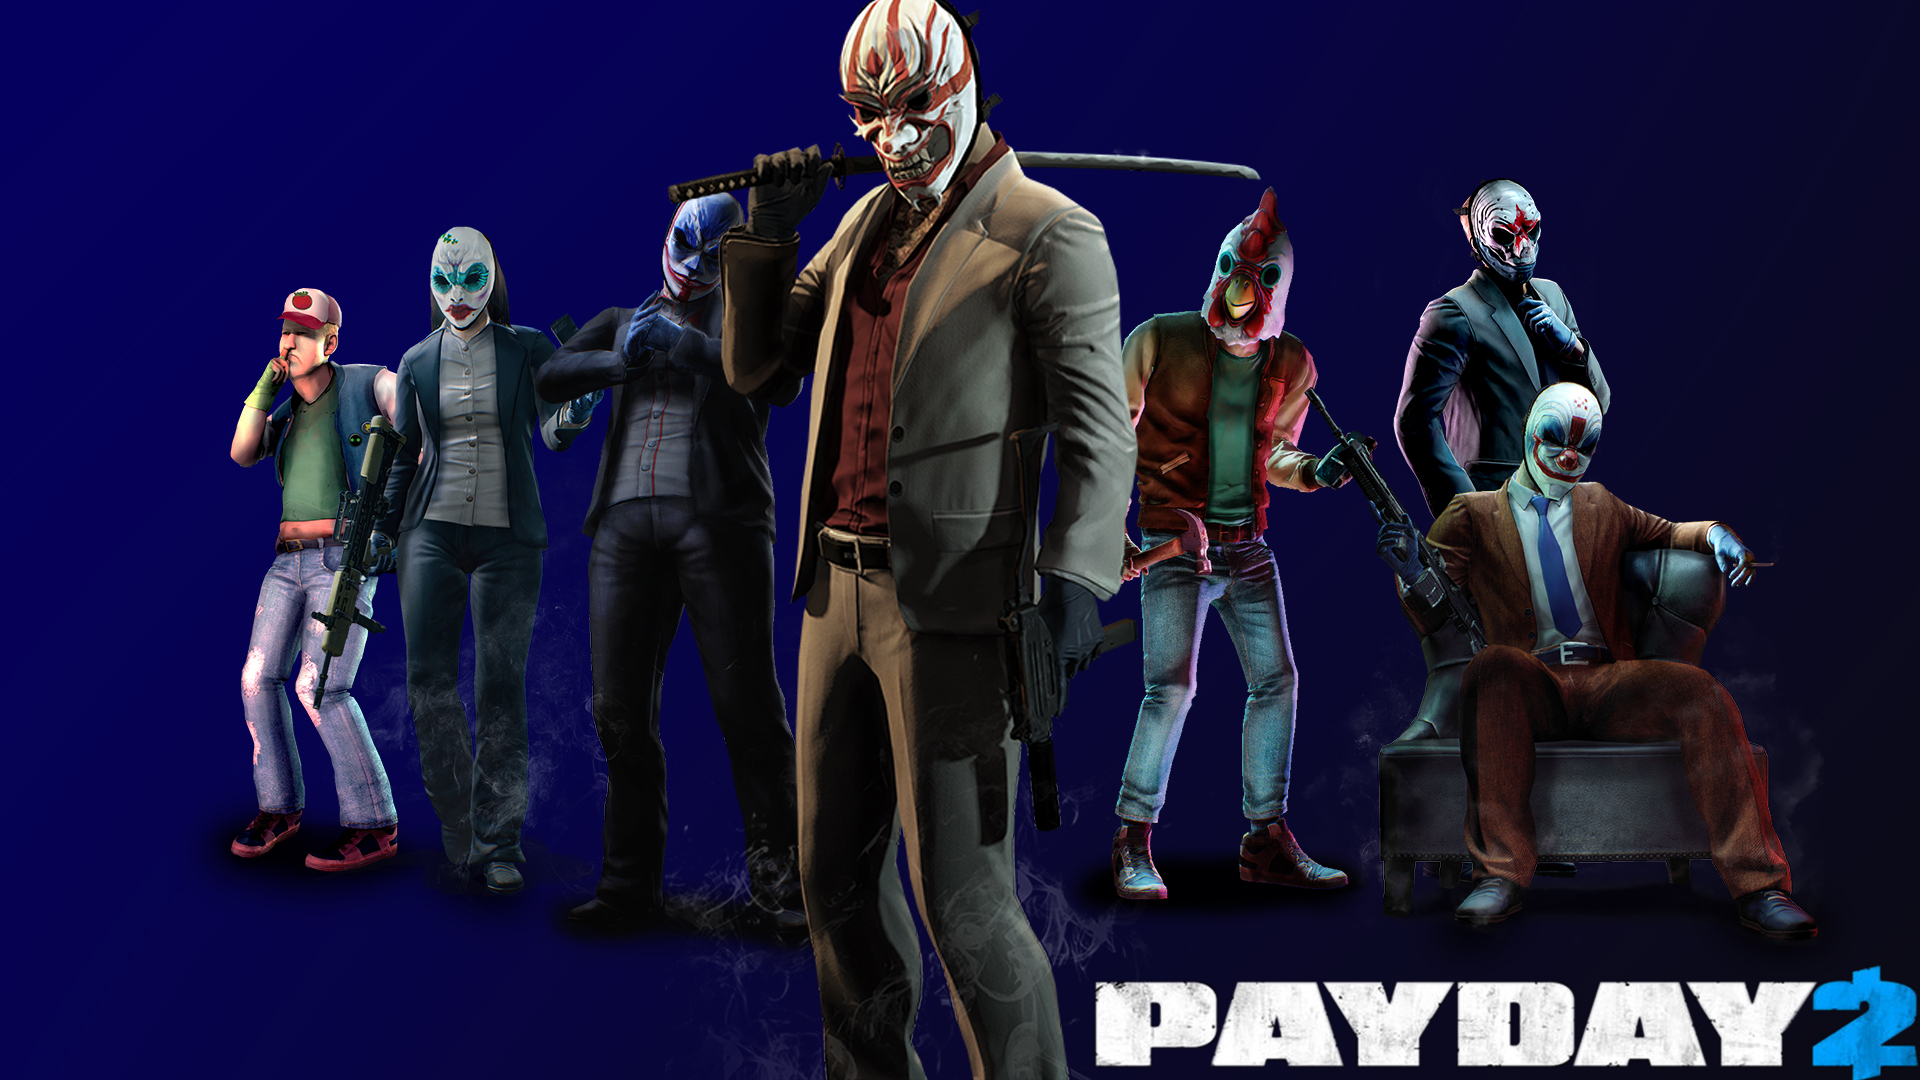 The death wish payday 2 фото 66